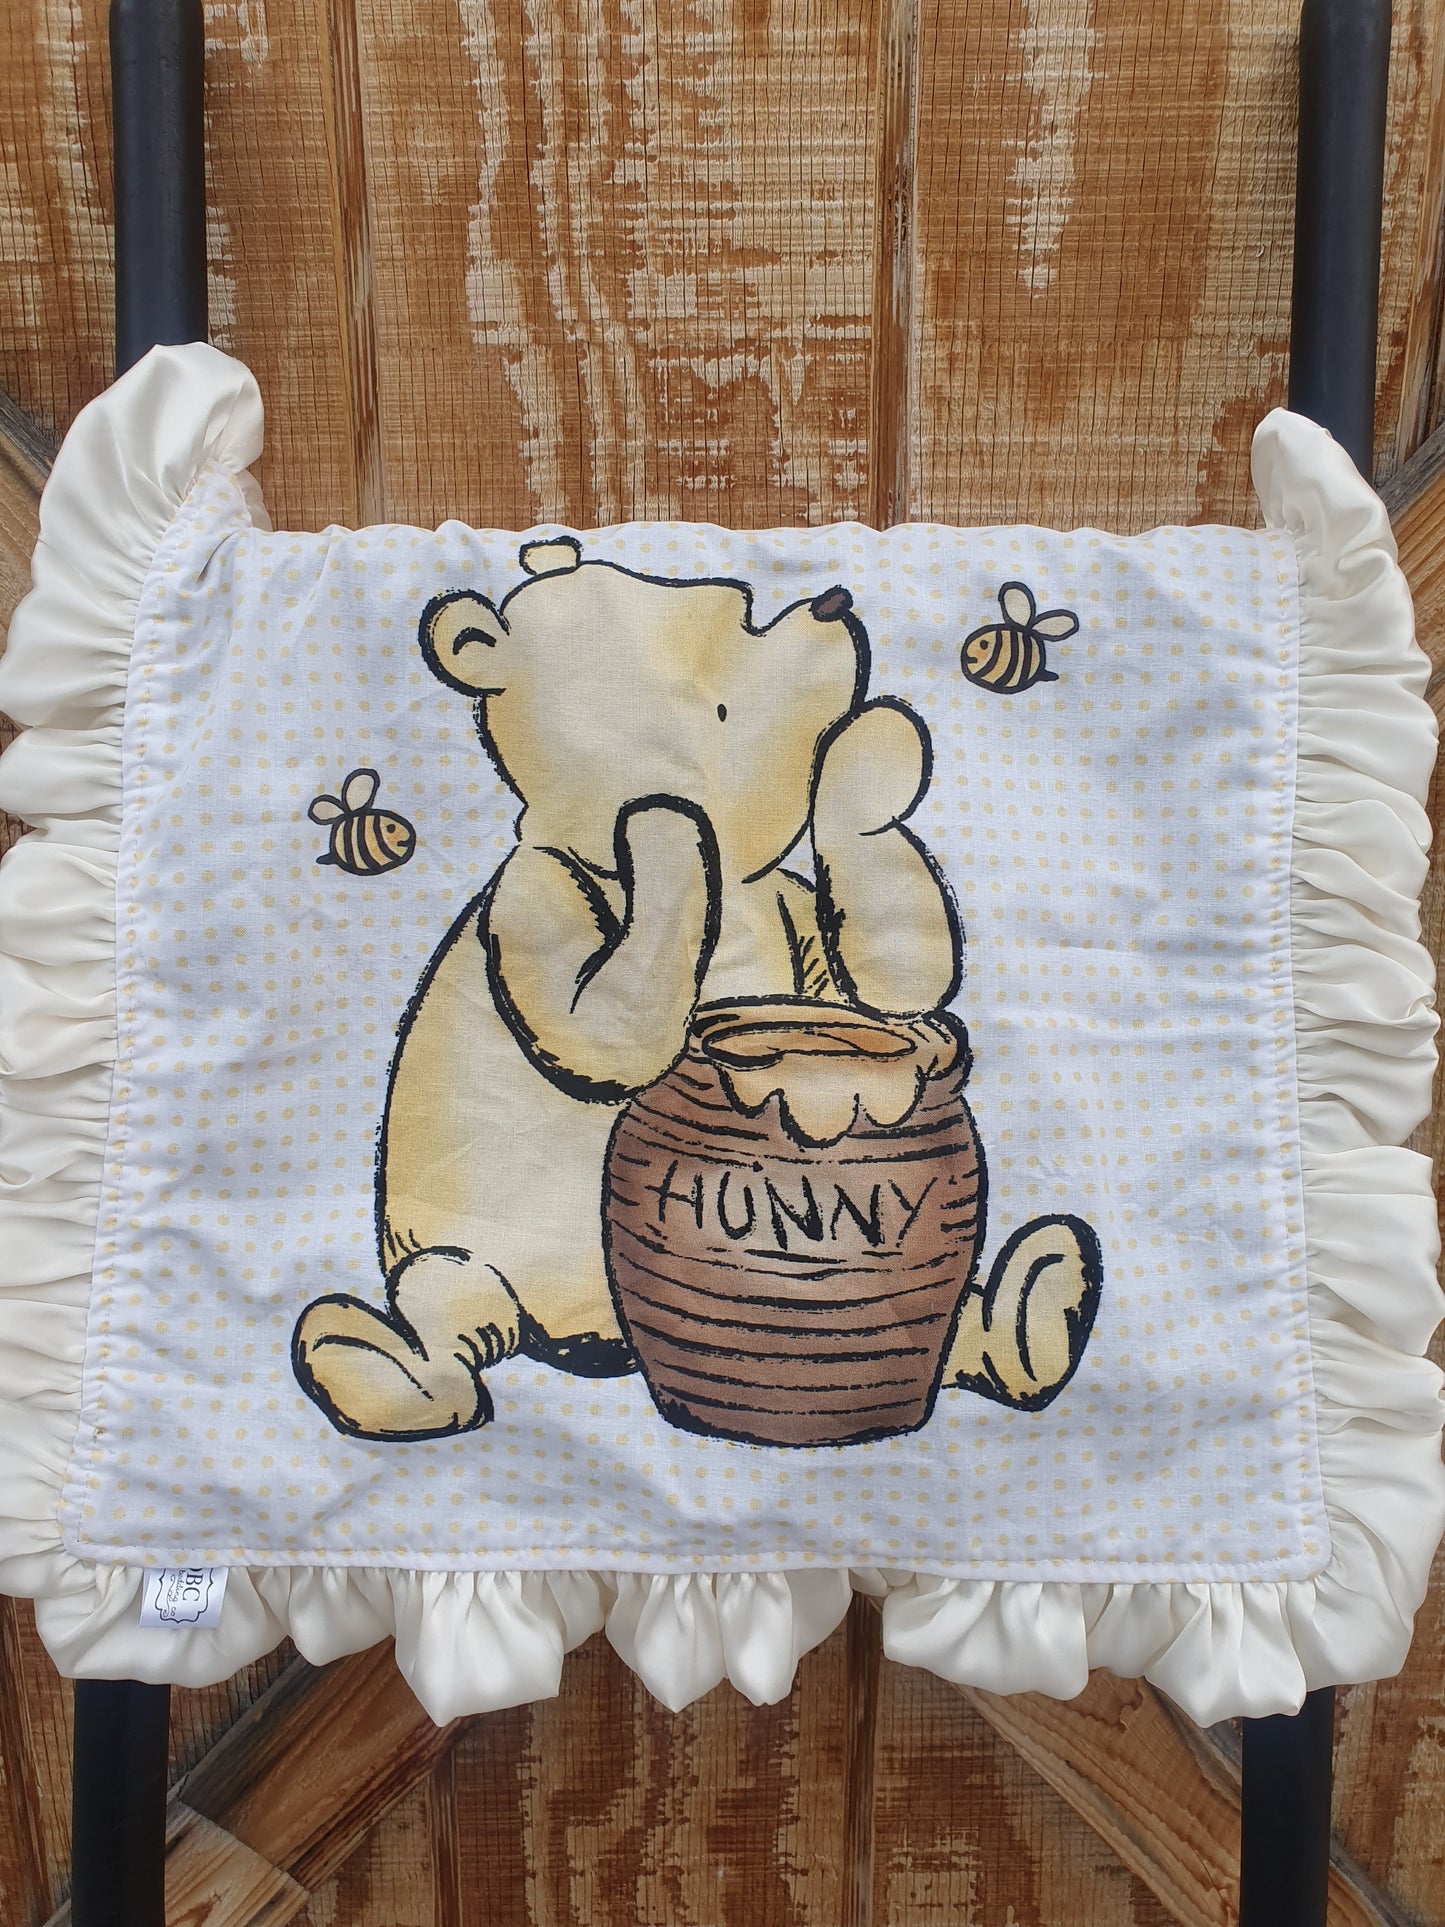 Baby Lovey - Pooh Bear and brown minky with ivory satin ruffle - DBC Baby Bedding Co 